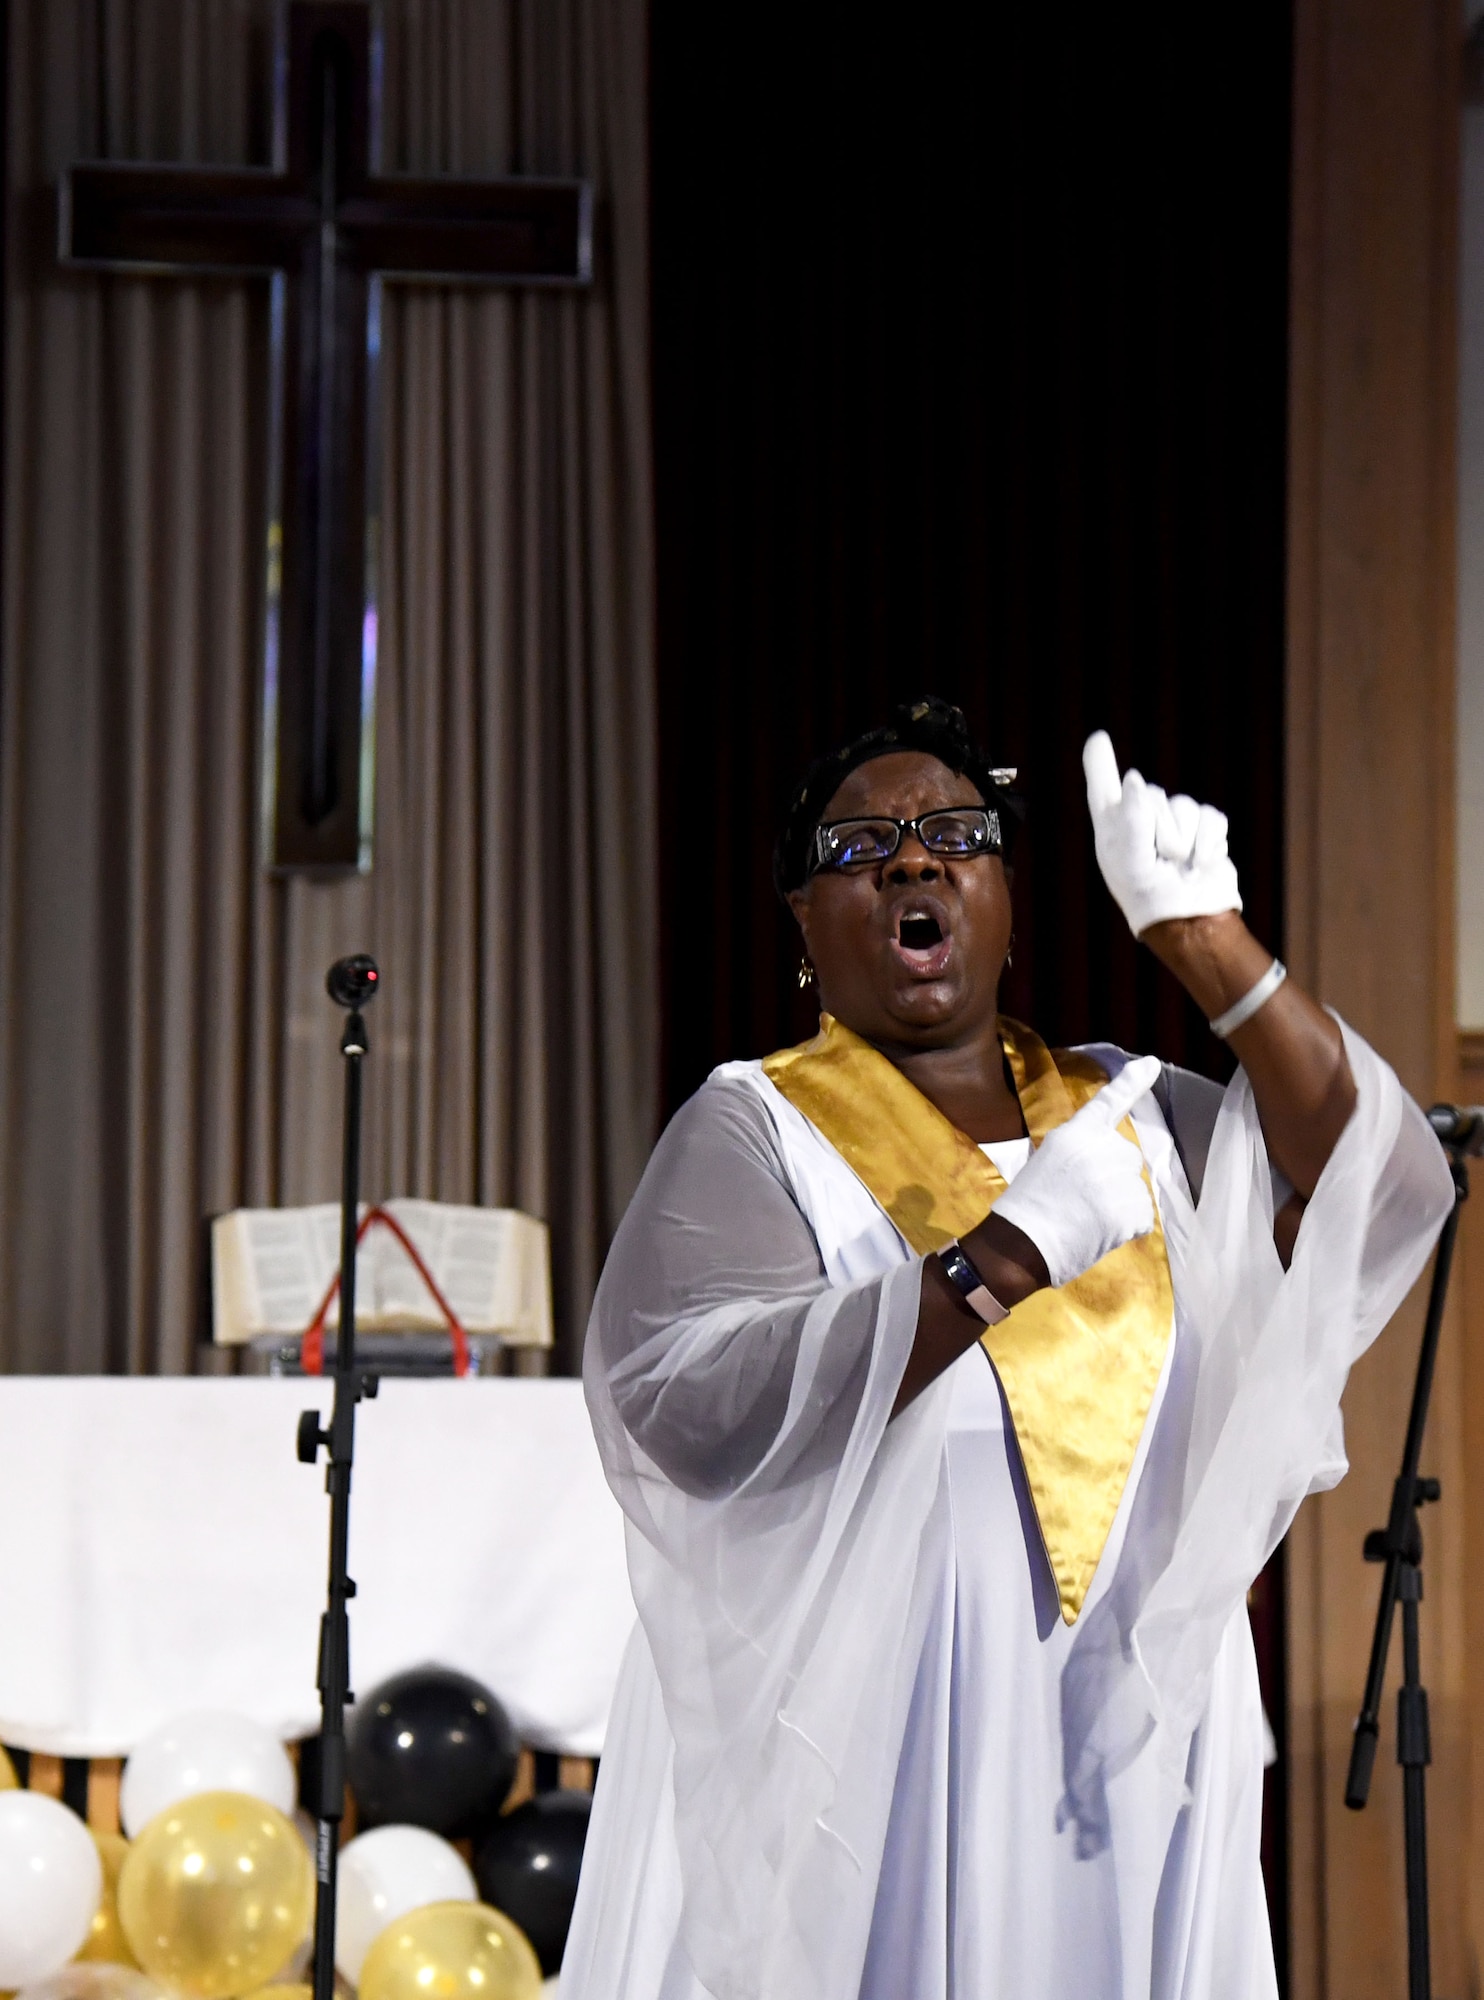 Carla Heard, Gospel Choir member, performs a ministry song in sign language during the 50th Gospel Worship Service Anniversary inside Larcher Chapel at Keesler Air Force Base, Mississippi, Sept. 12, 2021. The service's theme was “Growing Stronger, Growing Deeper, Reaching Higher." (U.S. Air Force photo by Kemberly Groue)